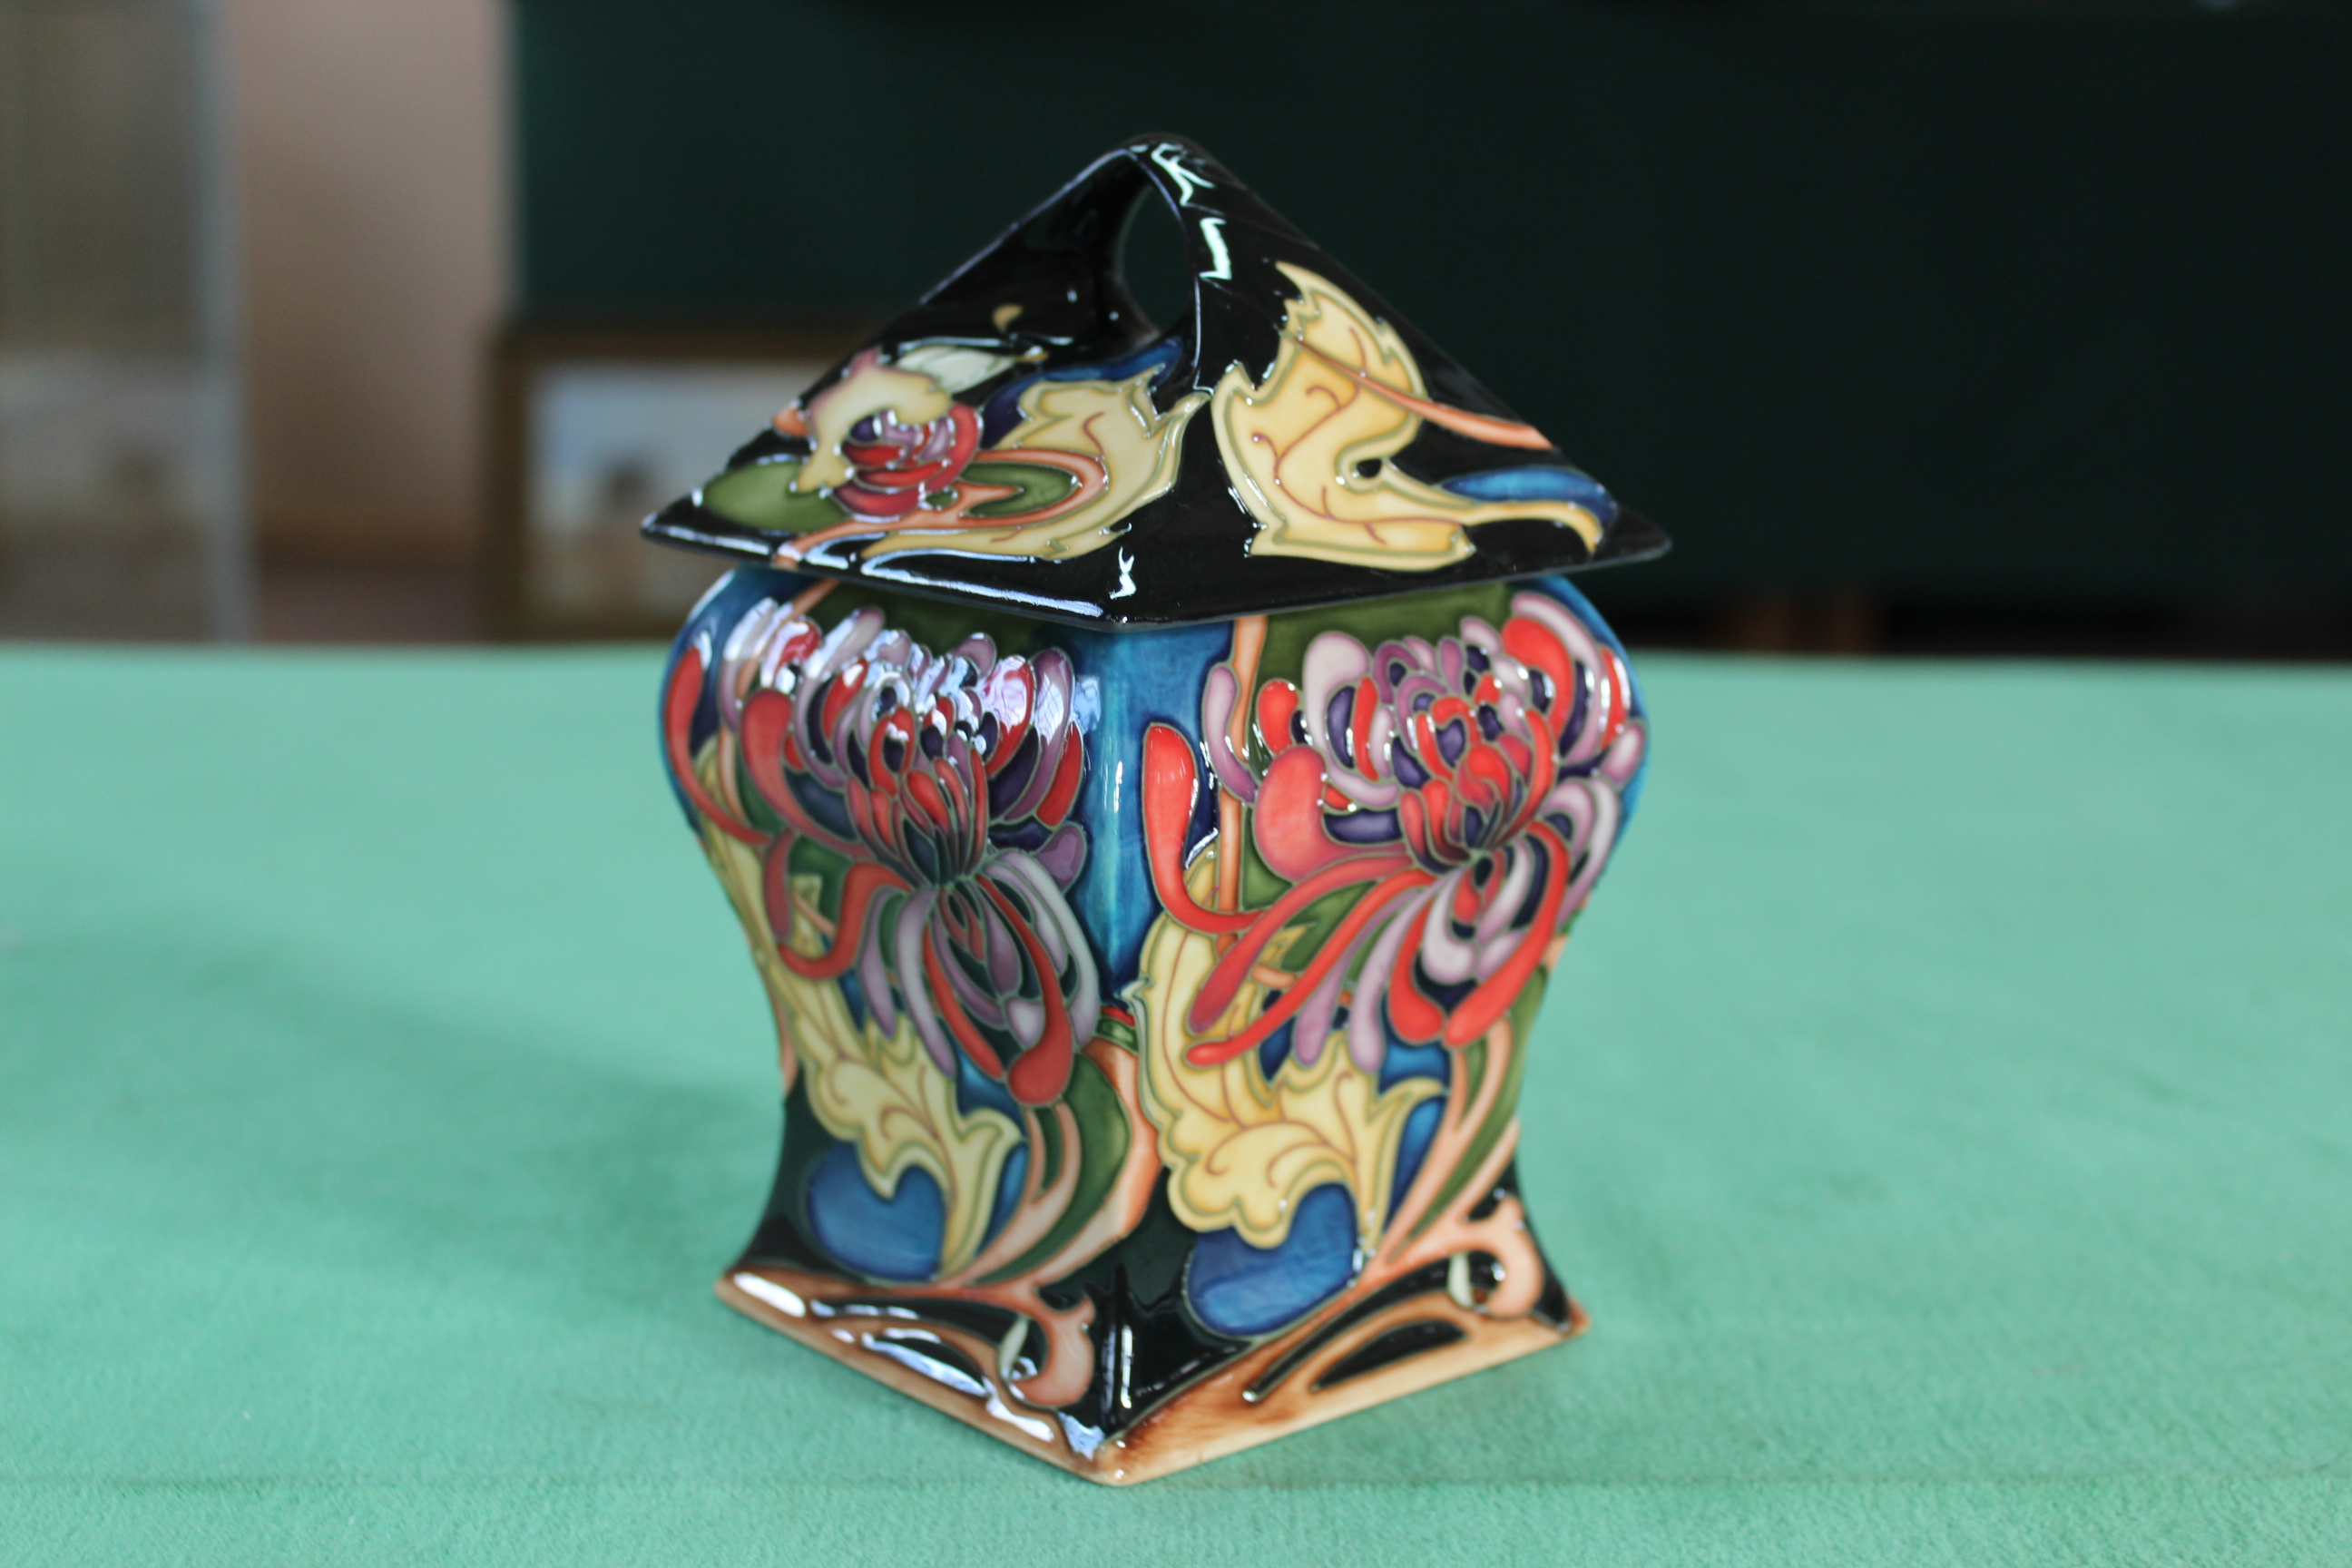 A Moorcroft 'Flower Box' lidded vase, 2008 by E Bossons, limited edition 43/100, 6 1/2" high, - Image 2 of 3